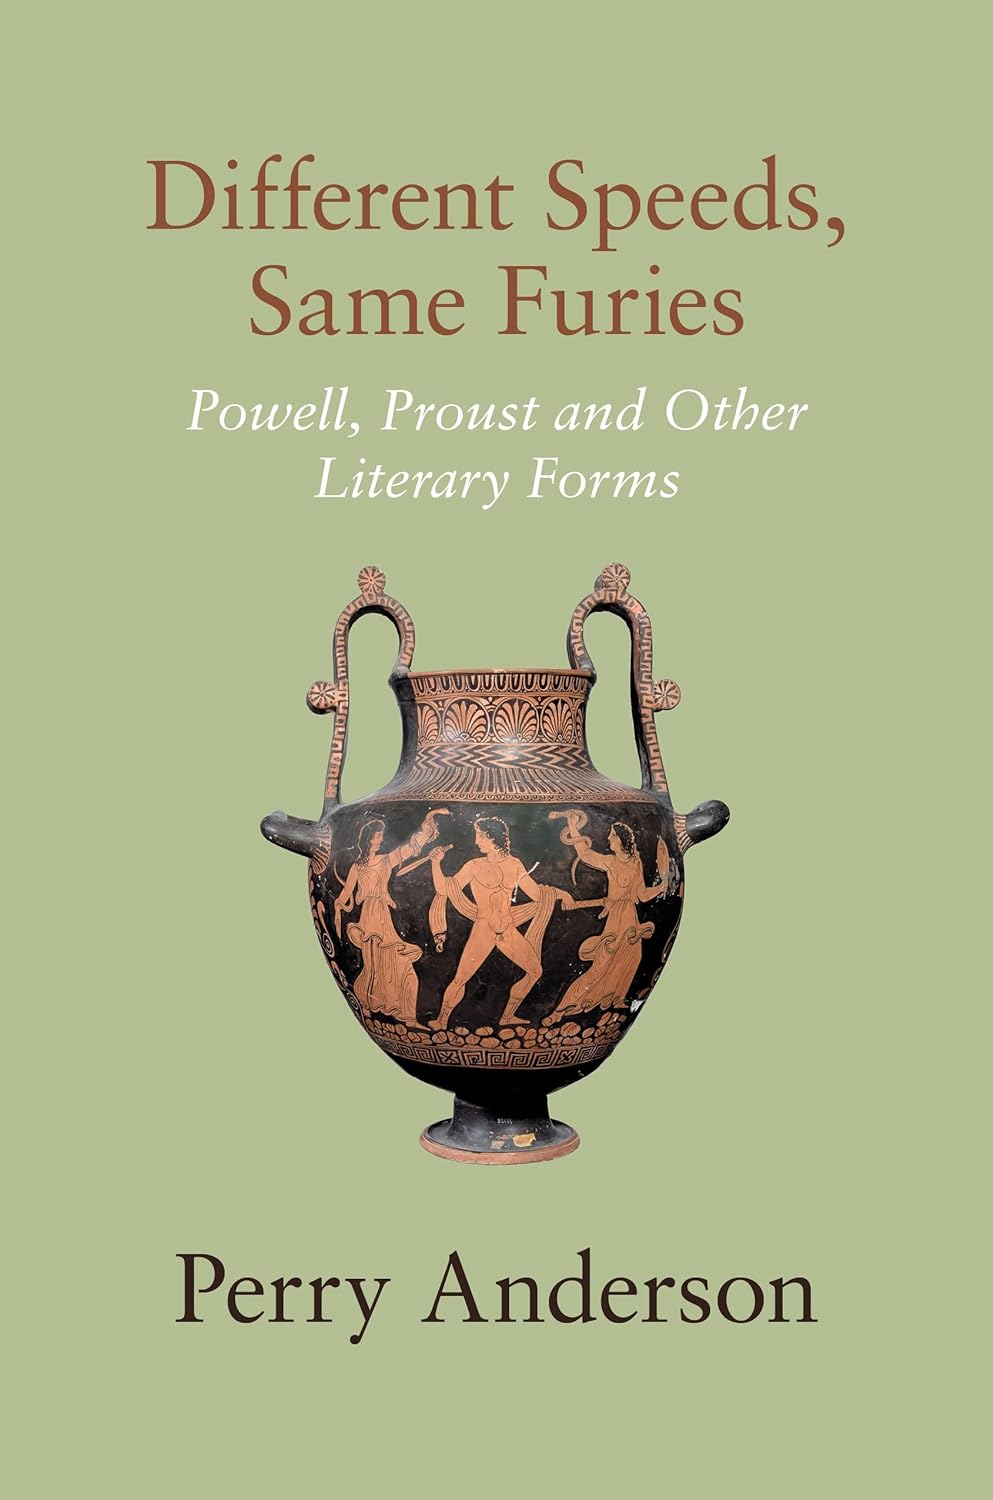 Anderson P. - Different Speeds, Same Furies: Powell, Proust and other Literary Forms